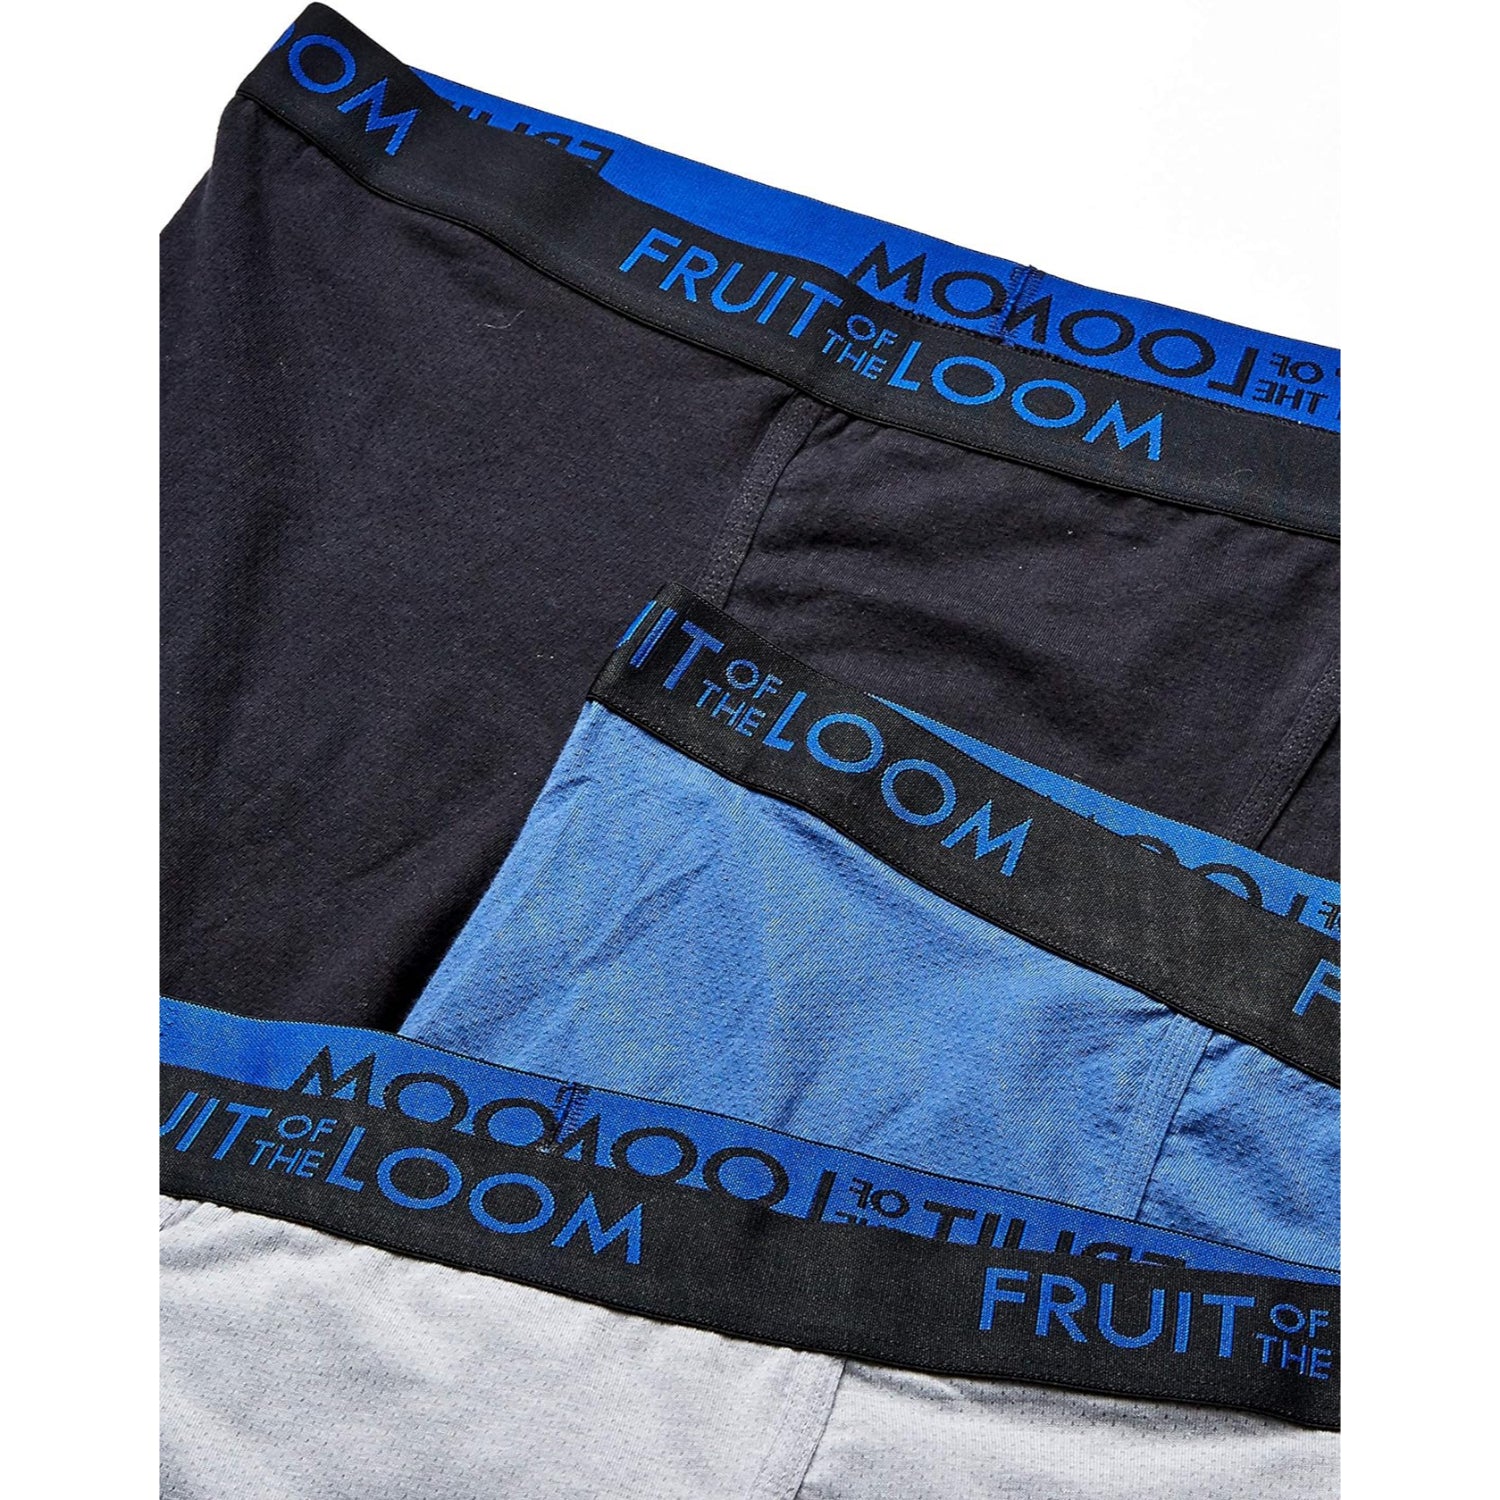  Fruit Of The Loom Mens Breathable Underwear Boxer Briefs